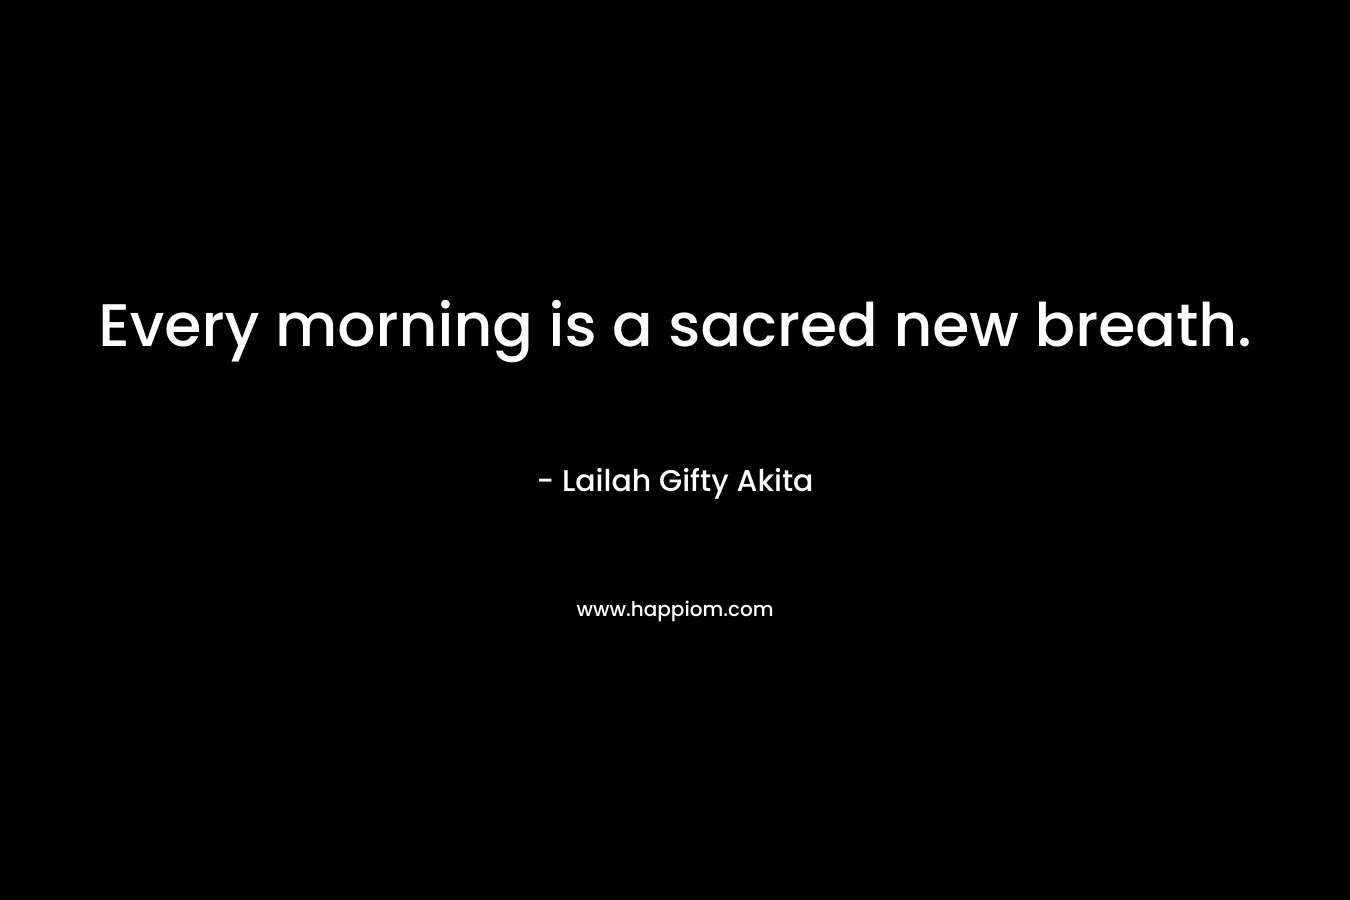 Every morning is a sacred new breath.